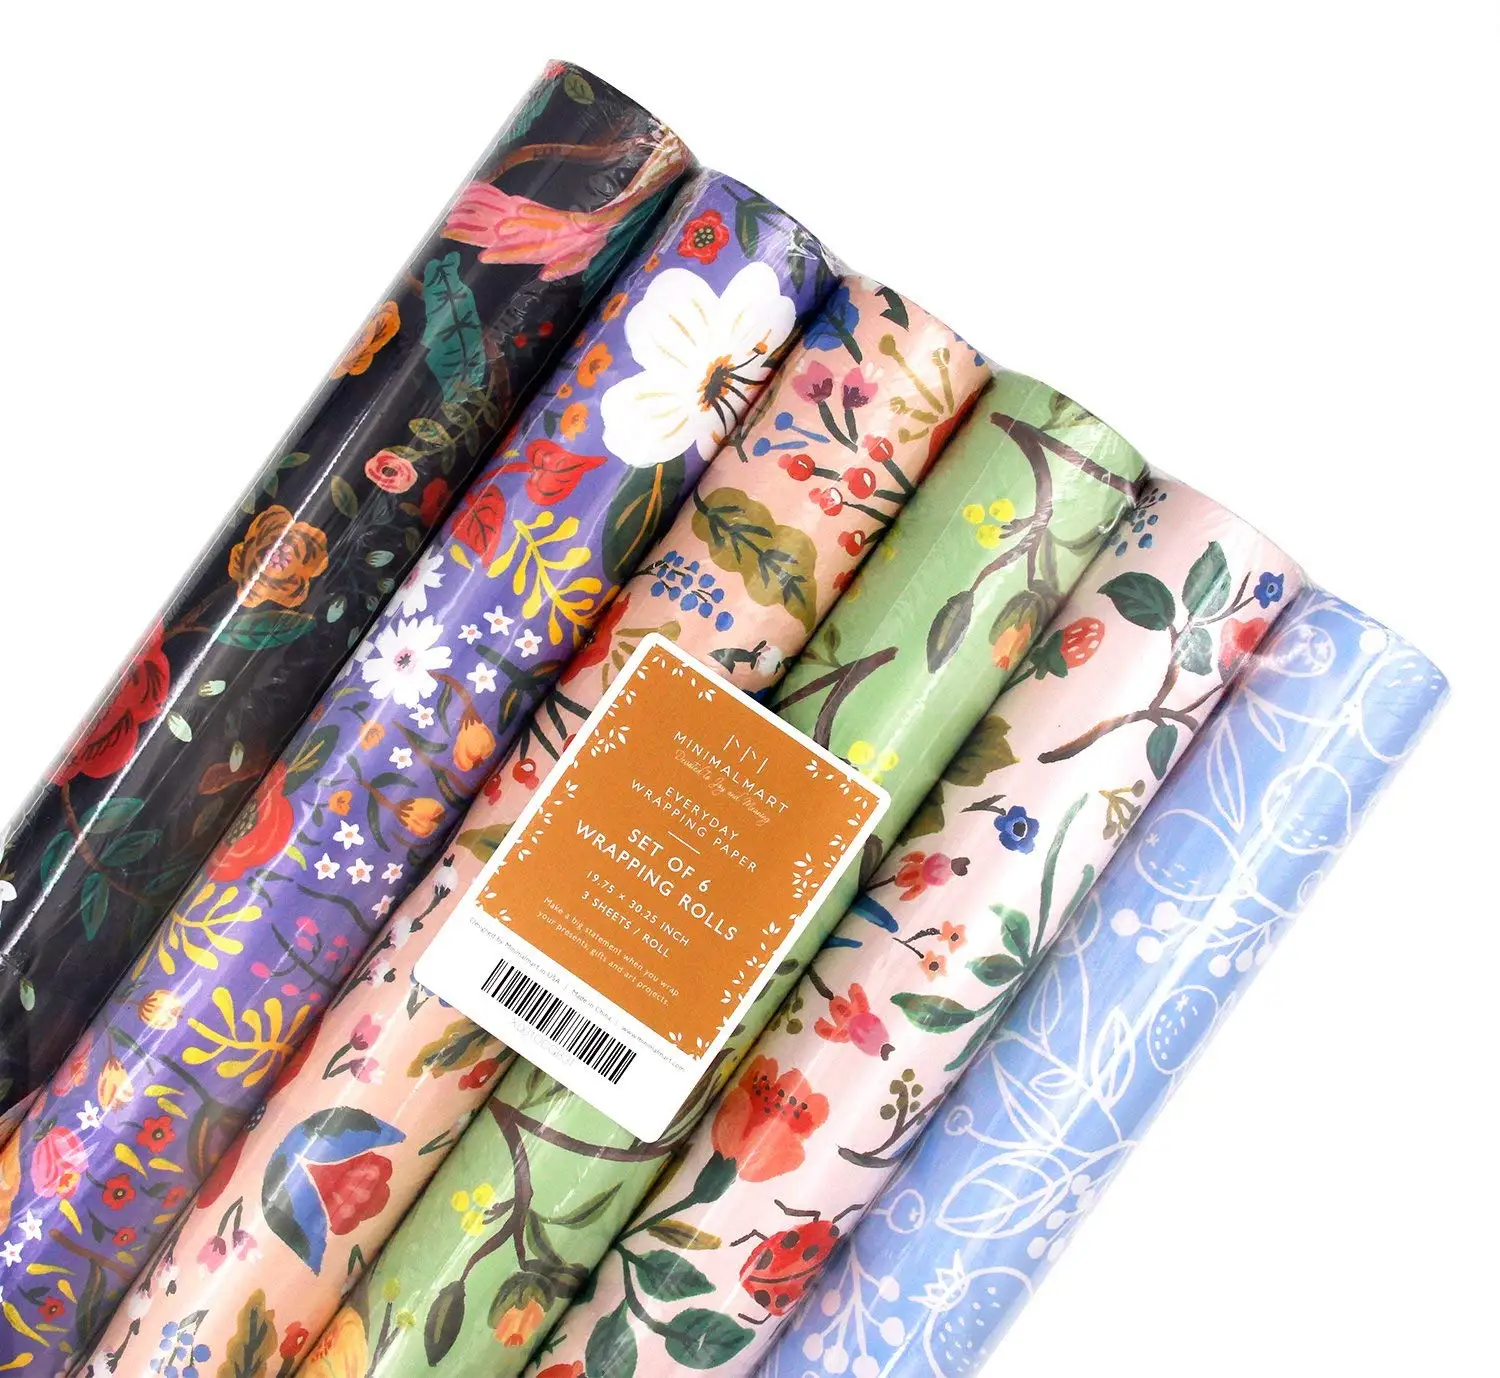 Buy Pack of 6 Gift Wrapping Paper Rolls - 6 Different Designs and